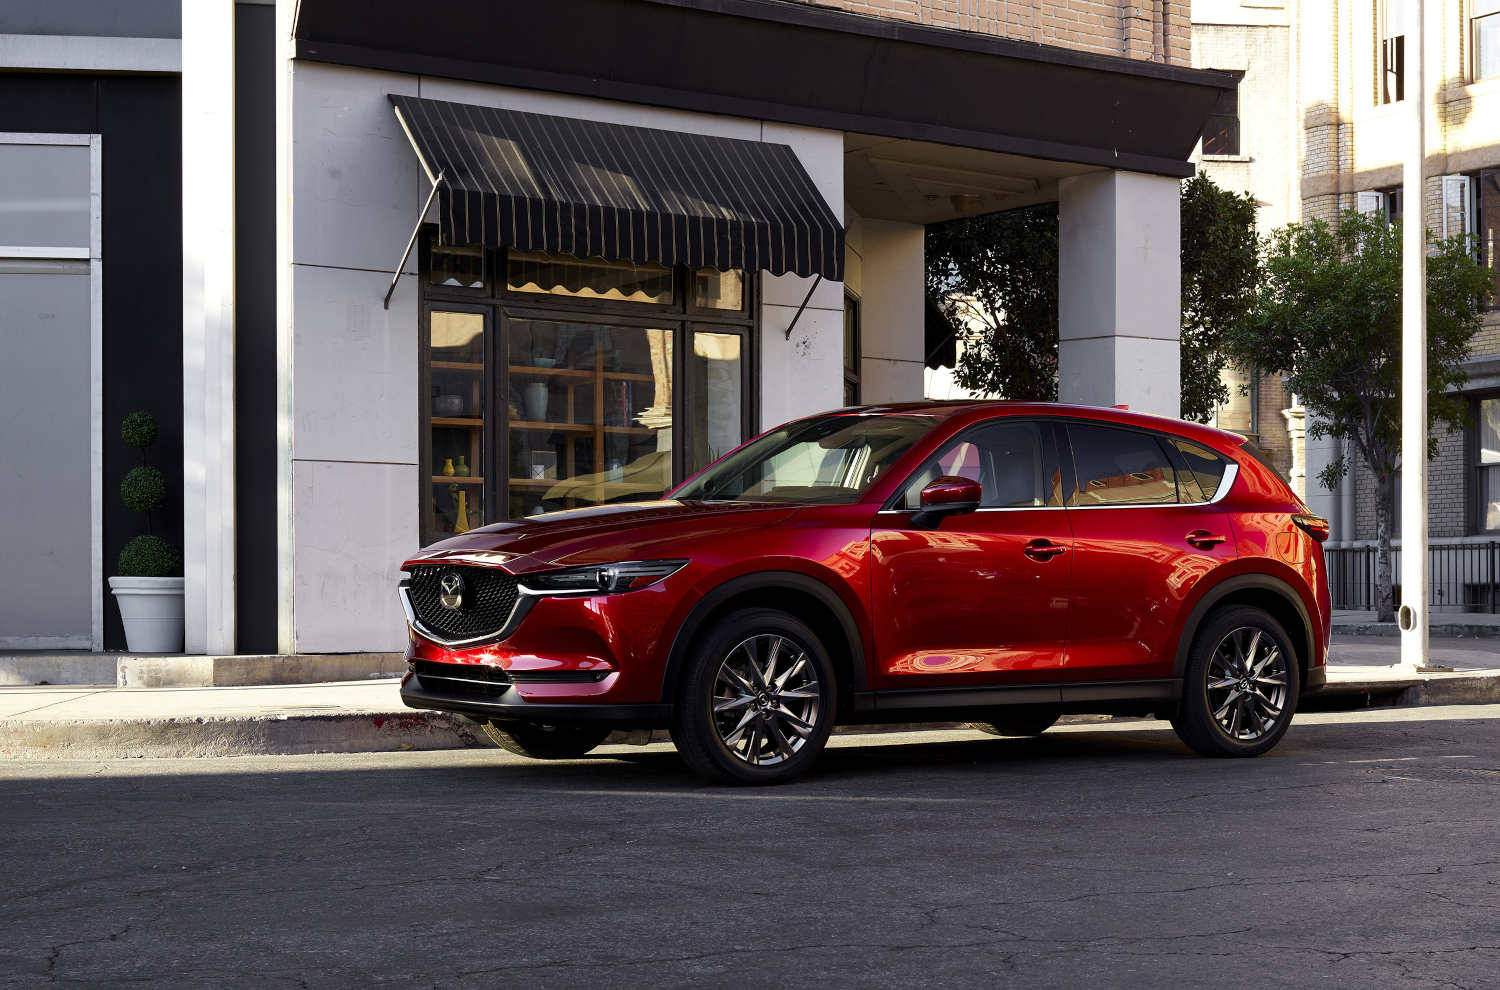 This Mazda CX-5 is one of the fastest small SUVs